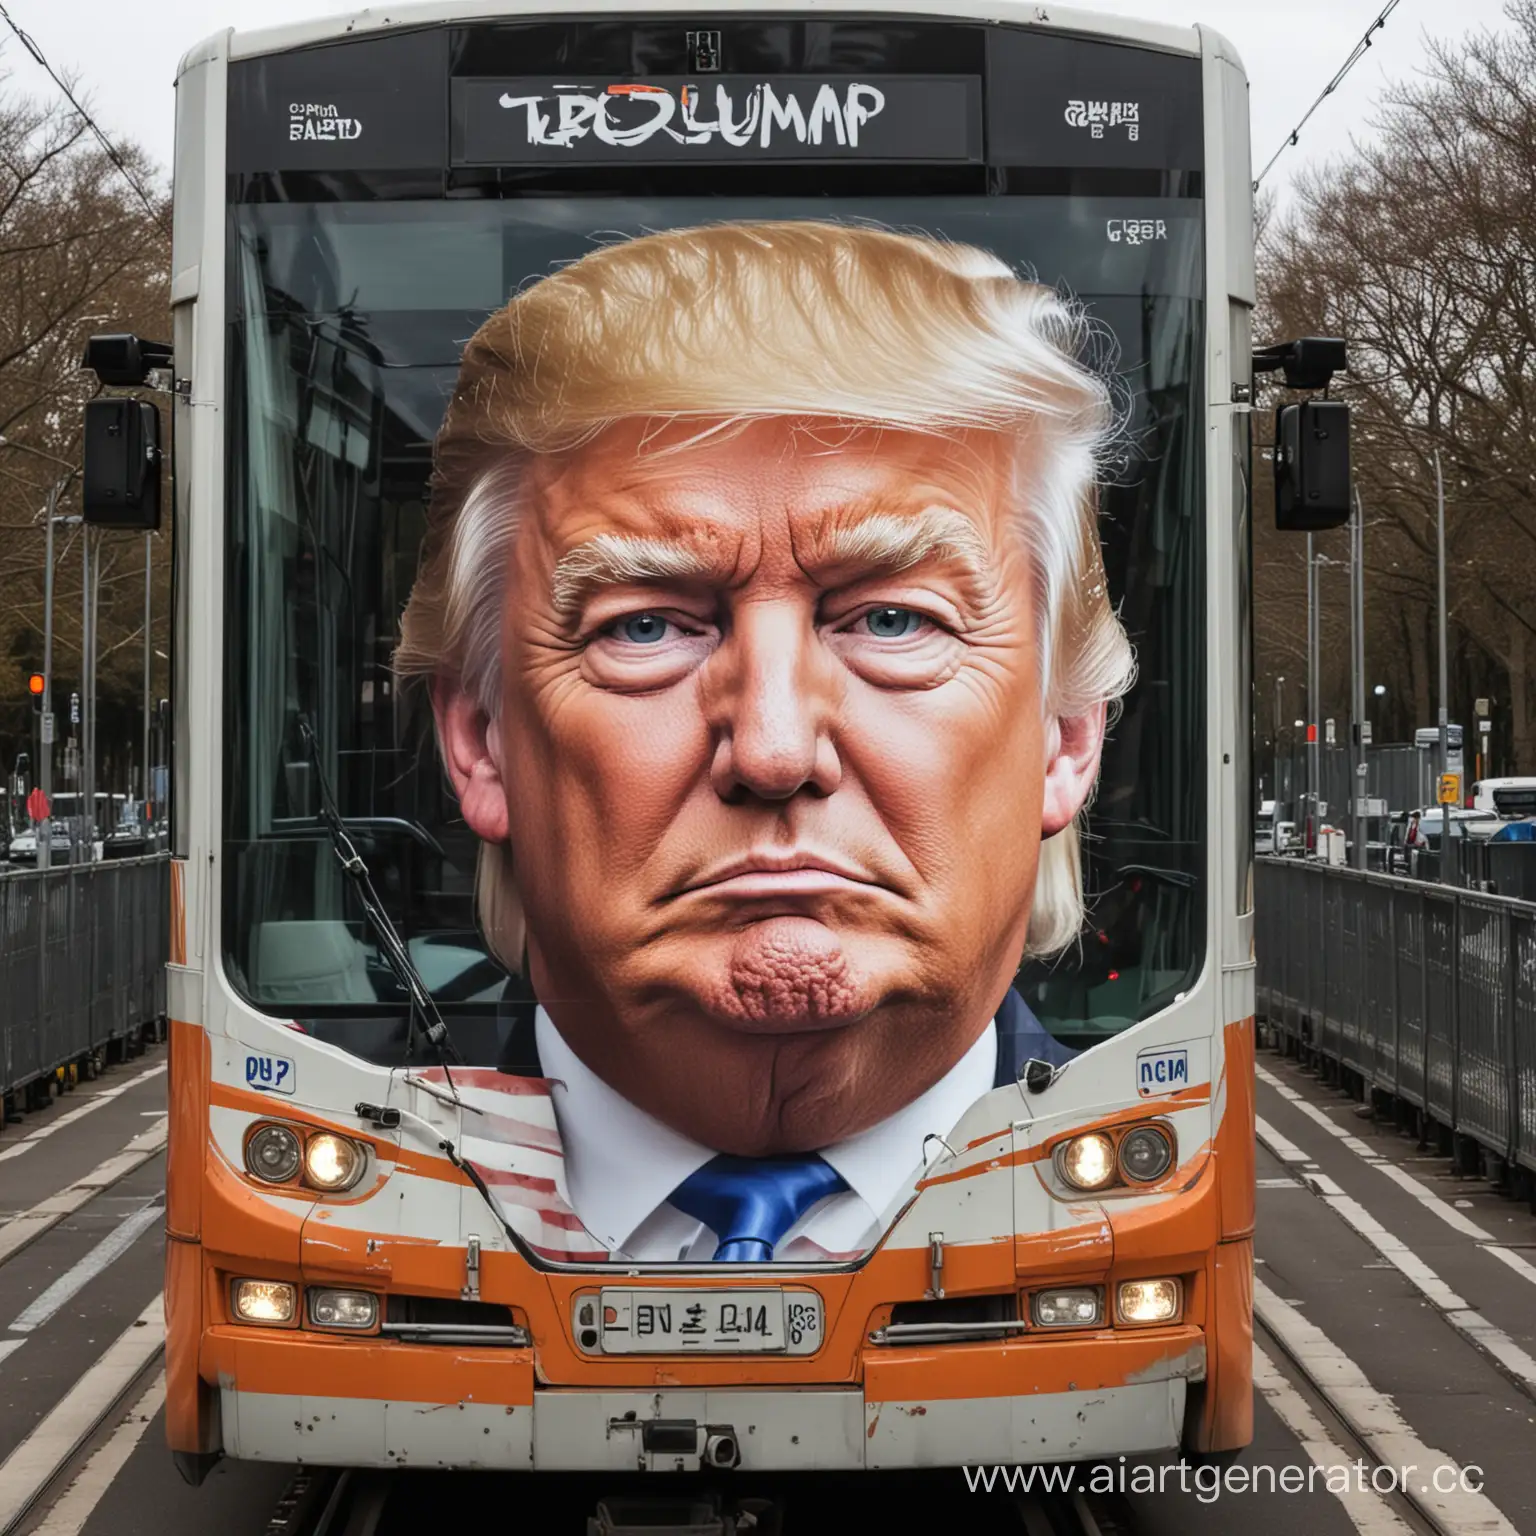 A tram with the face of Donald Trump